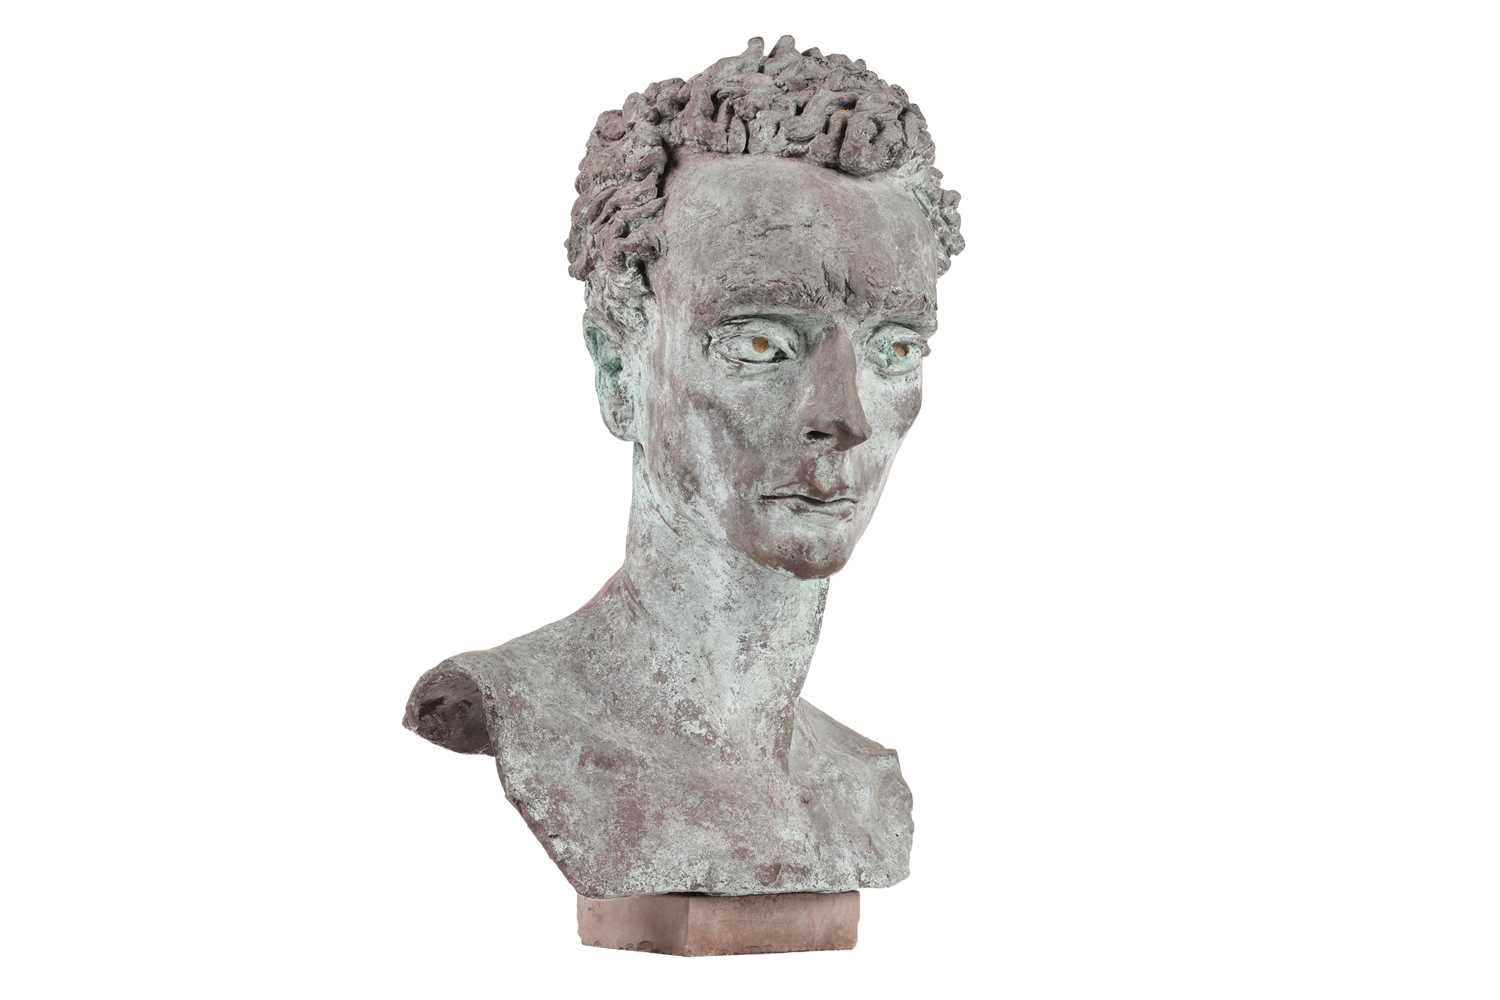 Sir Jacob Epstein (1880-1959), Bust of The Honourable Wynne Godley, green patinated bronze, 52 cm